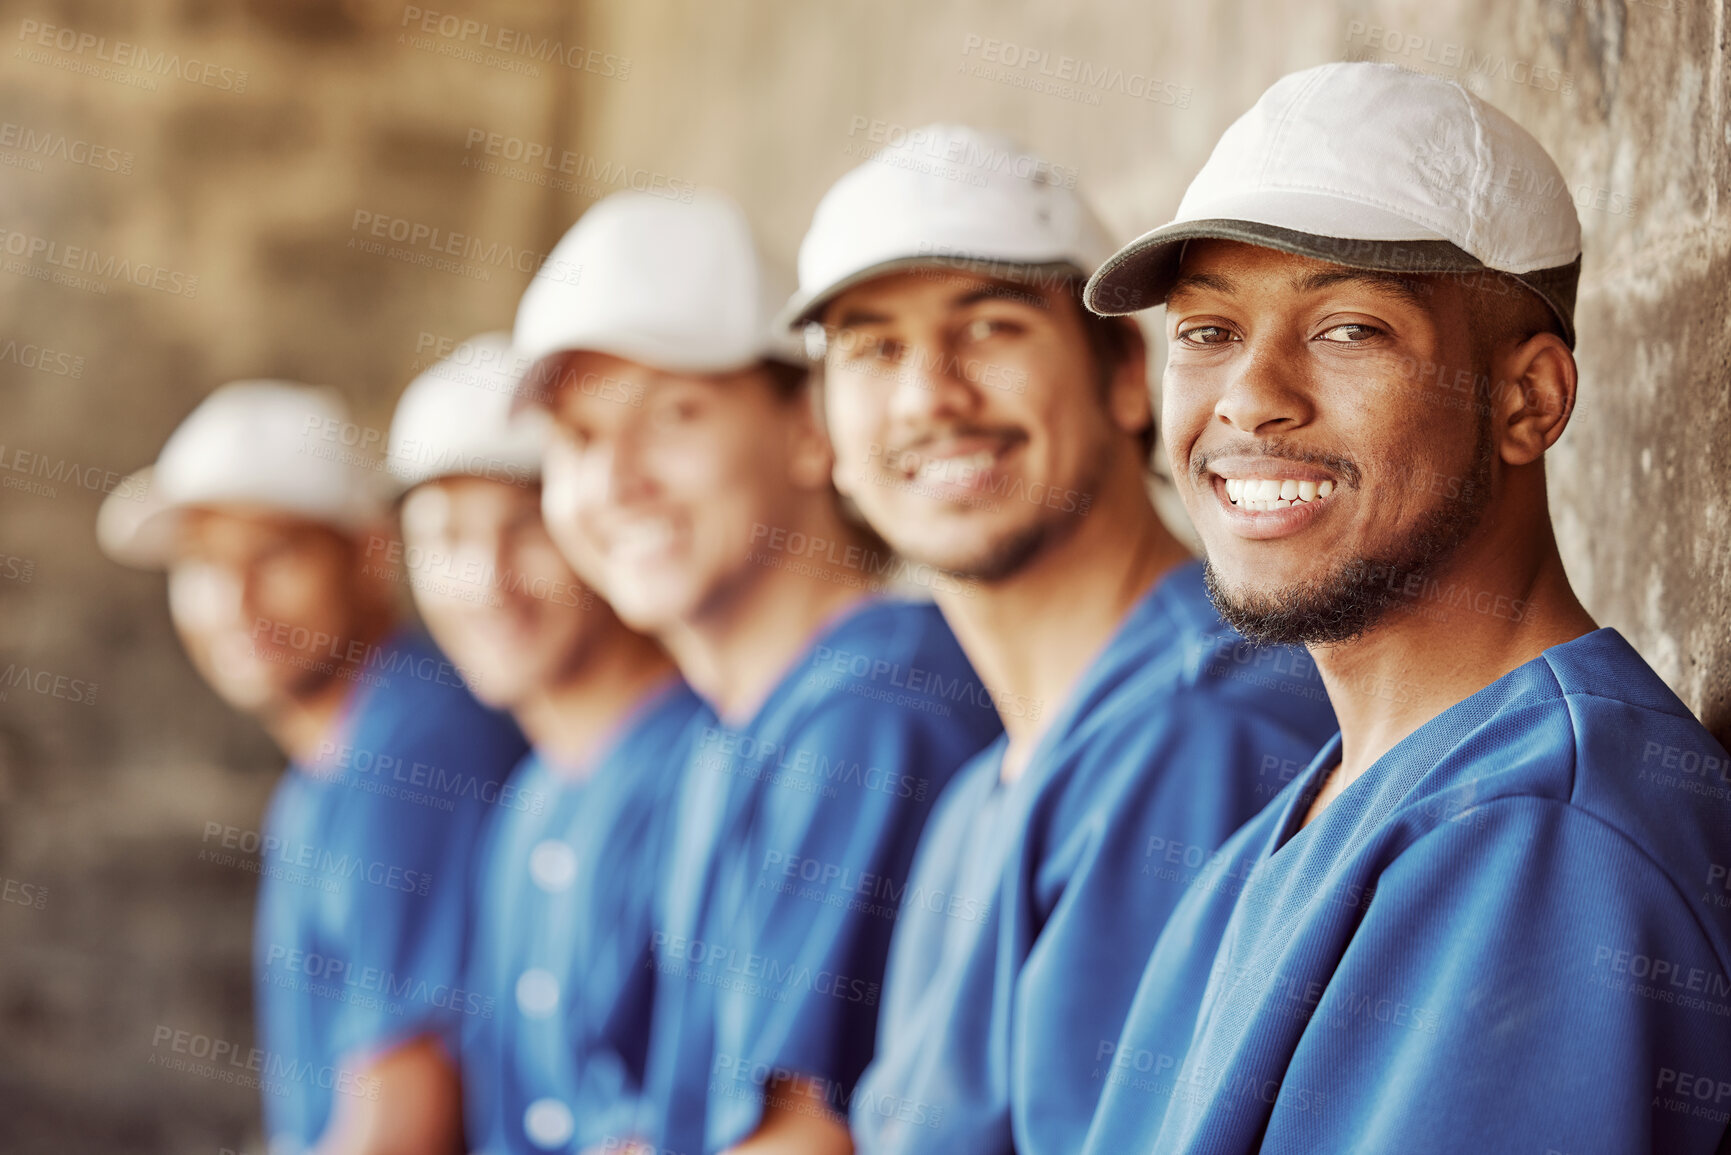 Buy stock photo Sports, baseball and team of players in dugout smiling and happy, sitting in row. Smile, teamwork and portrait of professional baseball team relax before competition game or training workout session.